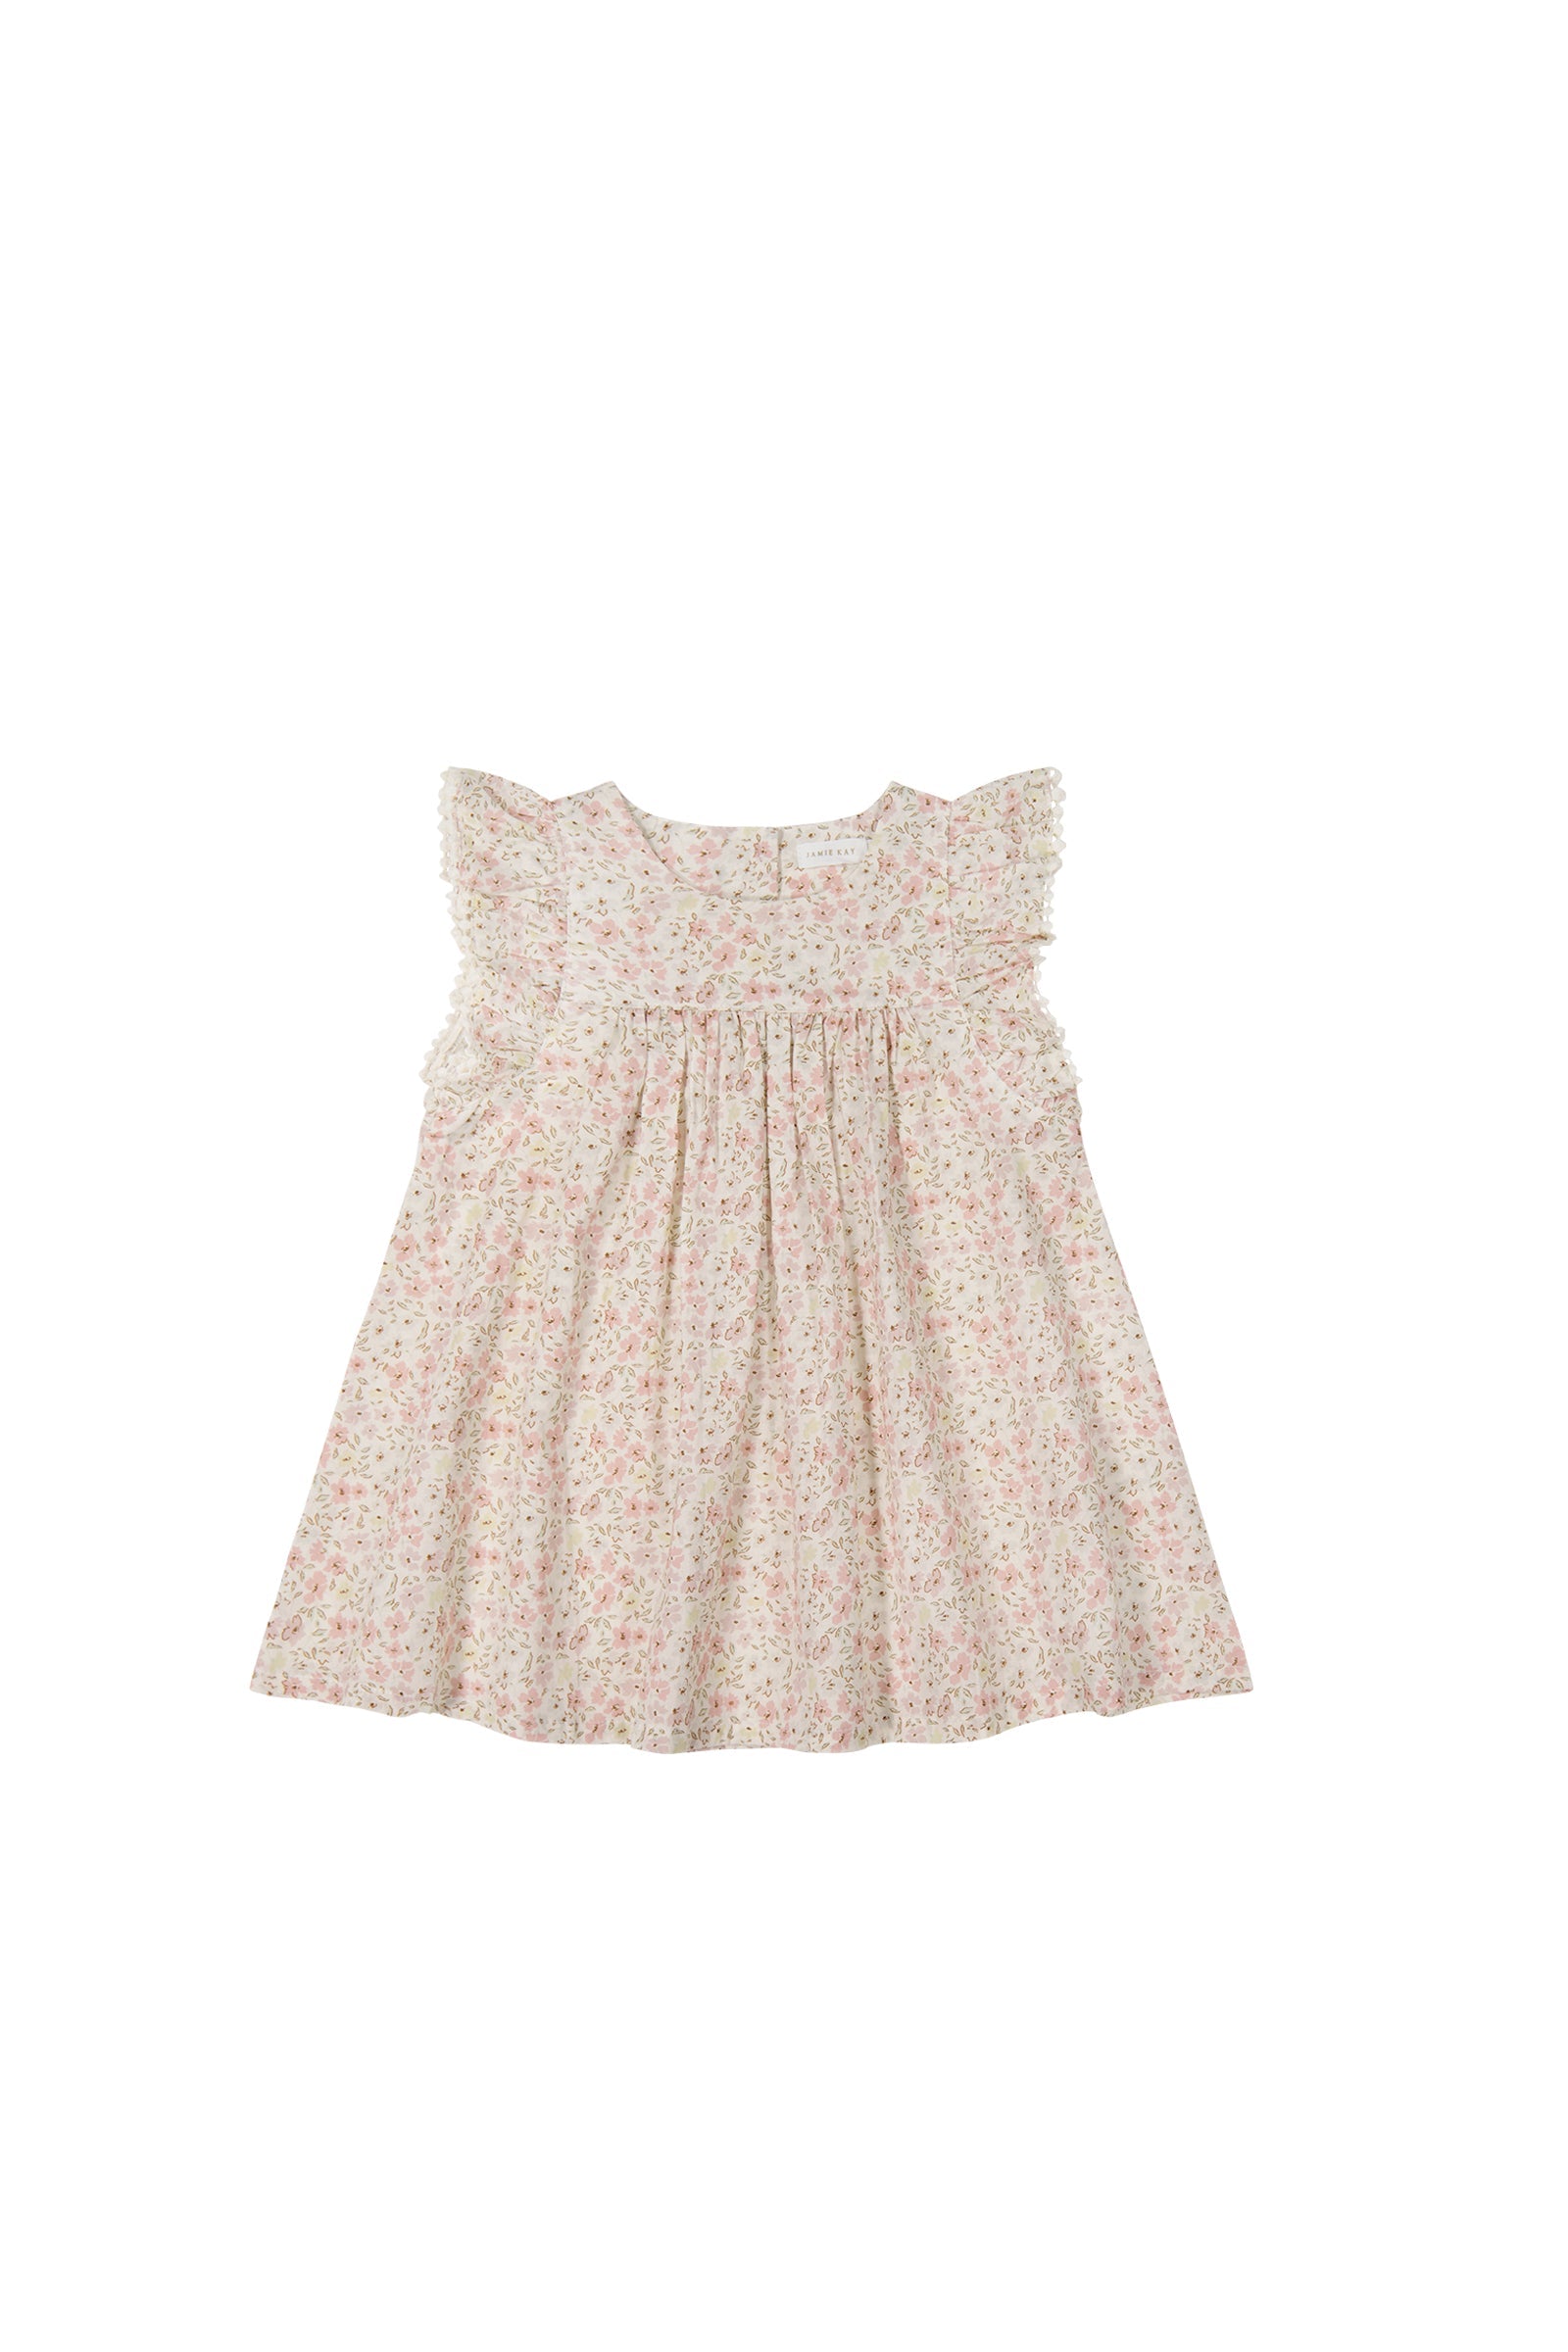 Organic Cotton Eleanor Dress - Fifi Floral (Almost Gone)